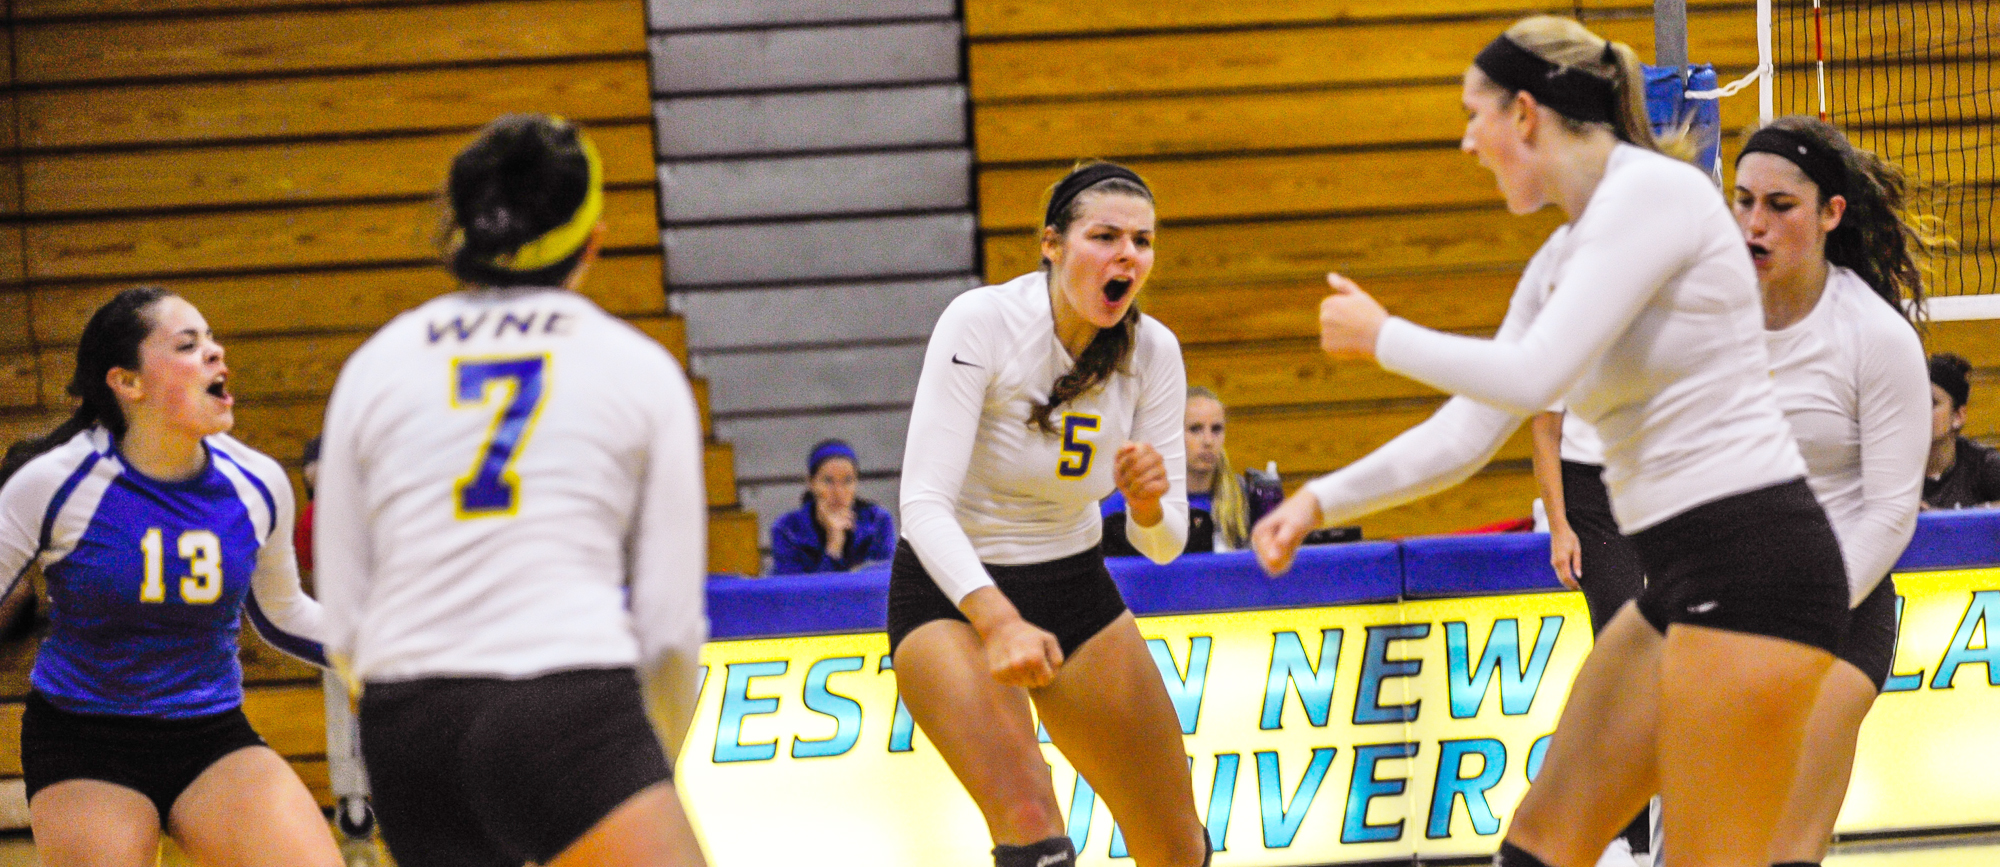 Golden Bears Punch Ticket to CCC Championship Match with Dominant 3-0 Win over UNE